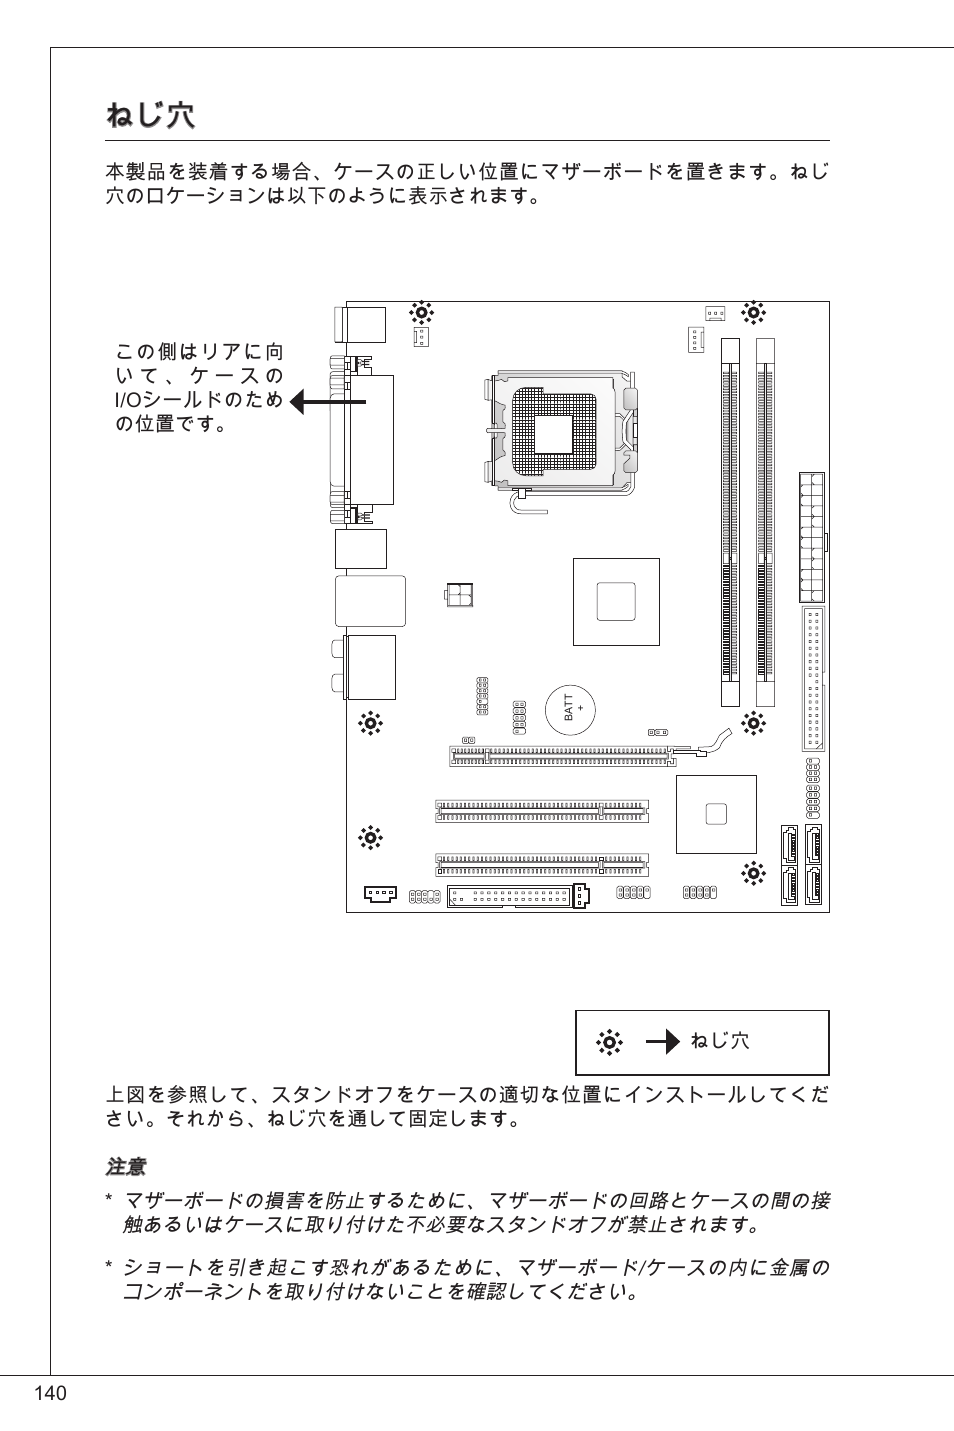 MSI G41M-P26 User Manual | Page 140 / 155 | Original mode | Also for: G41M -P28